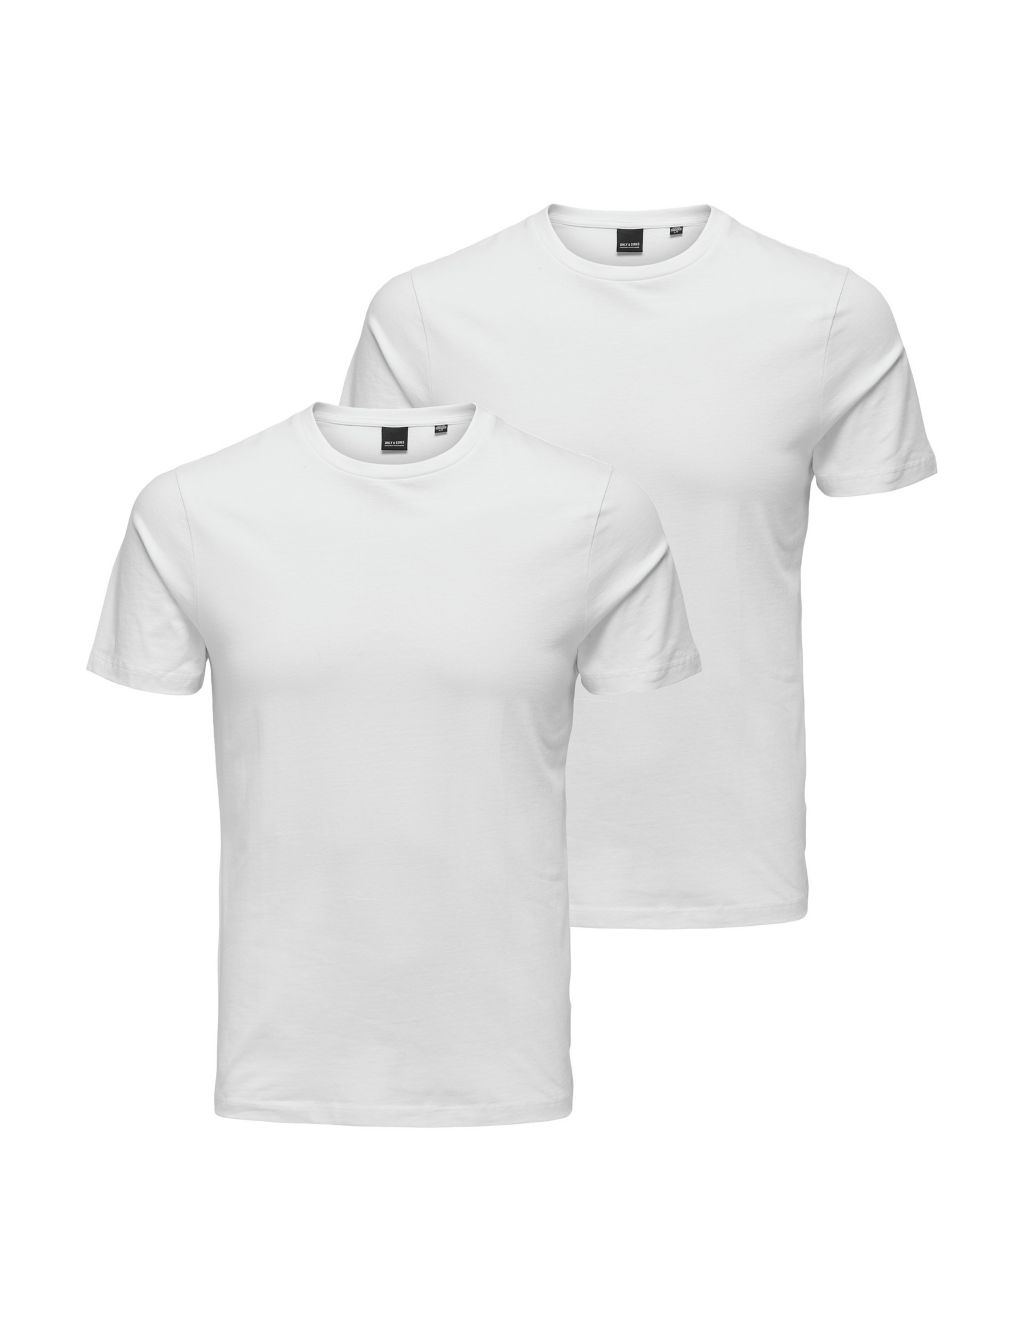 Buy Men’s Slim-Fit T-Shirts from the M&S UK Online Shop